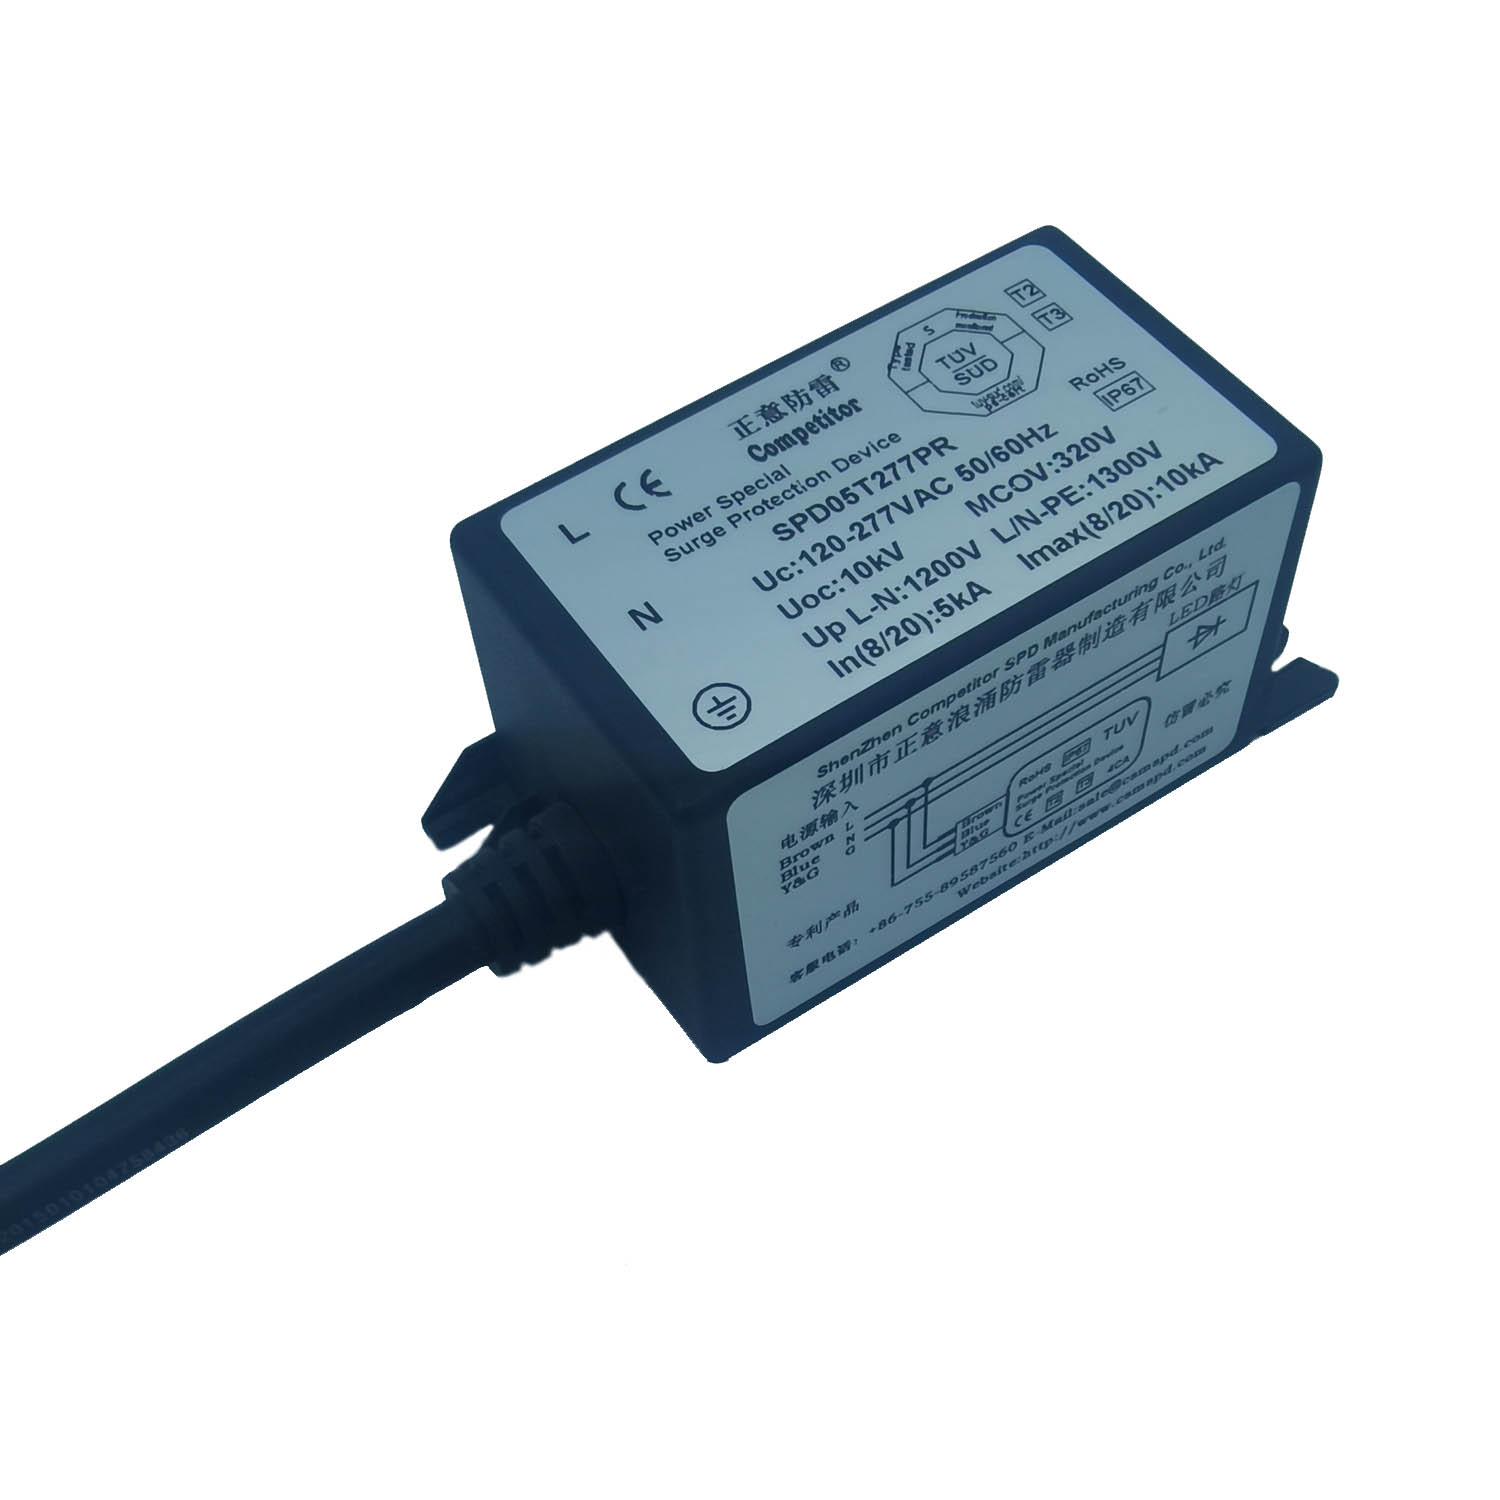 TUV Certification Surge Protection Device